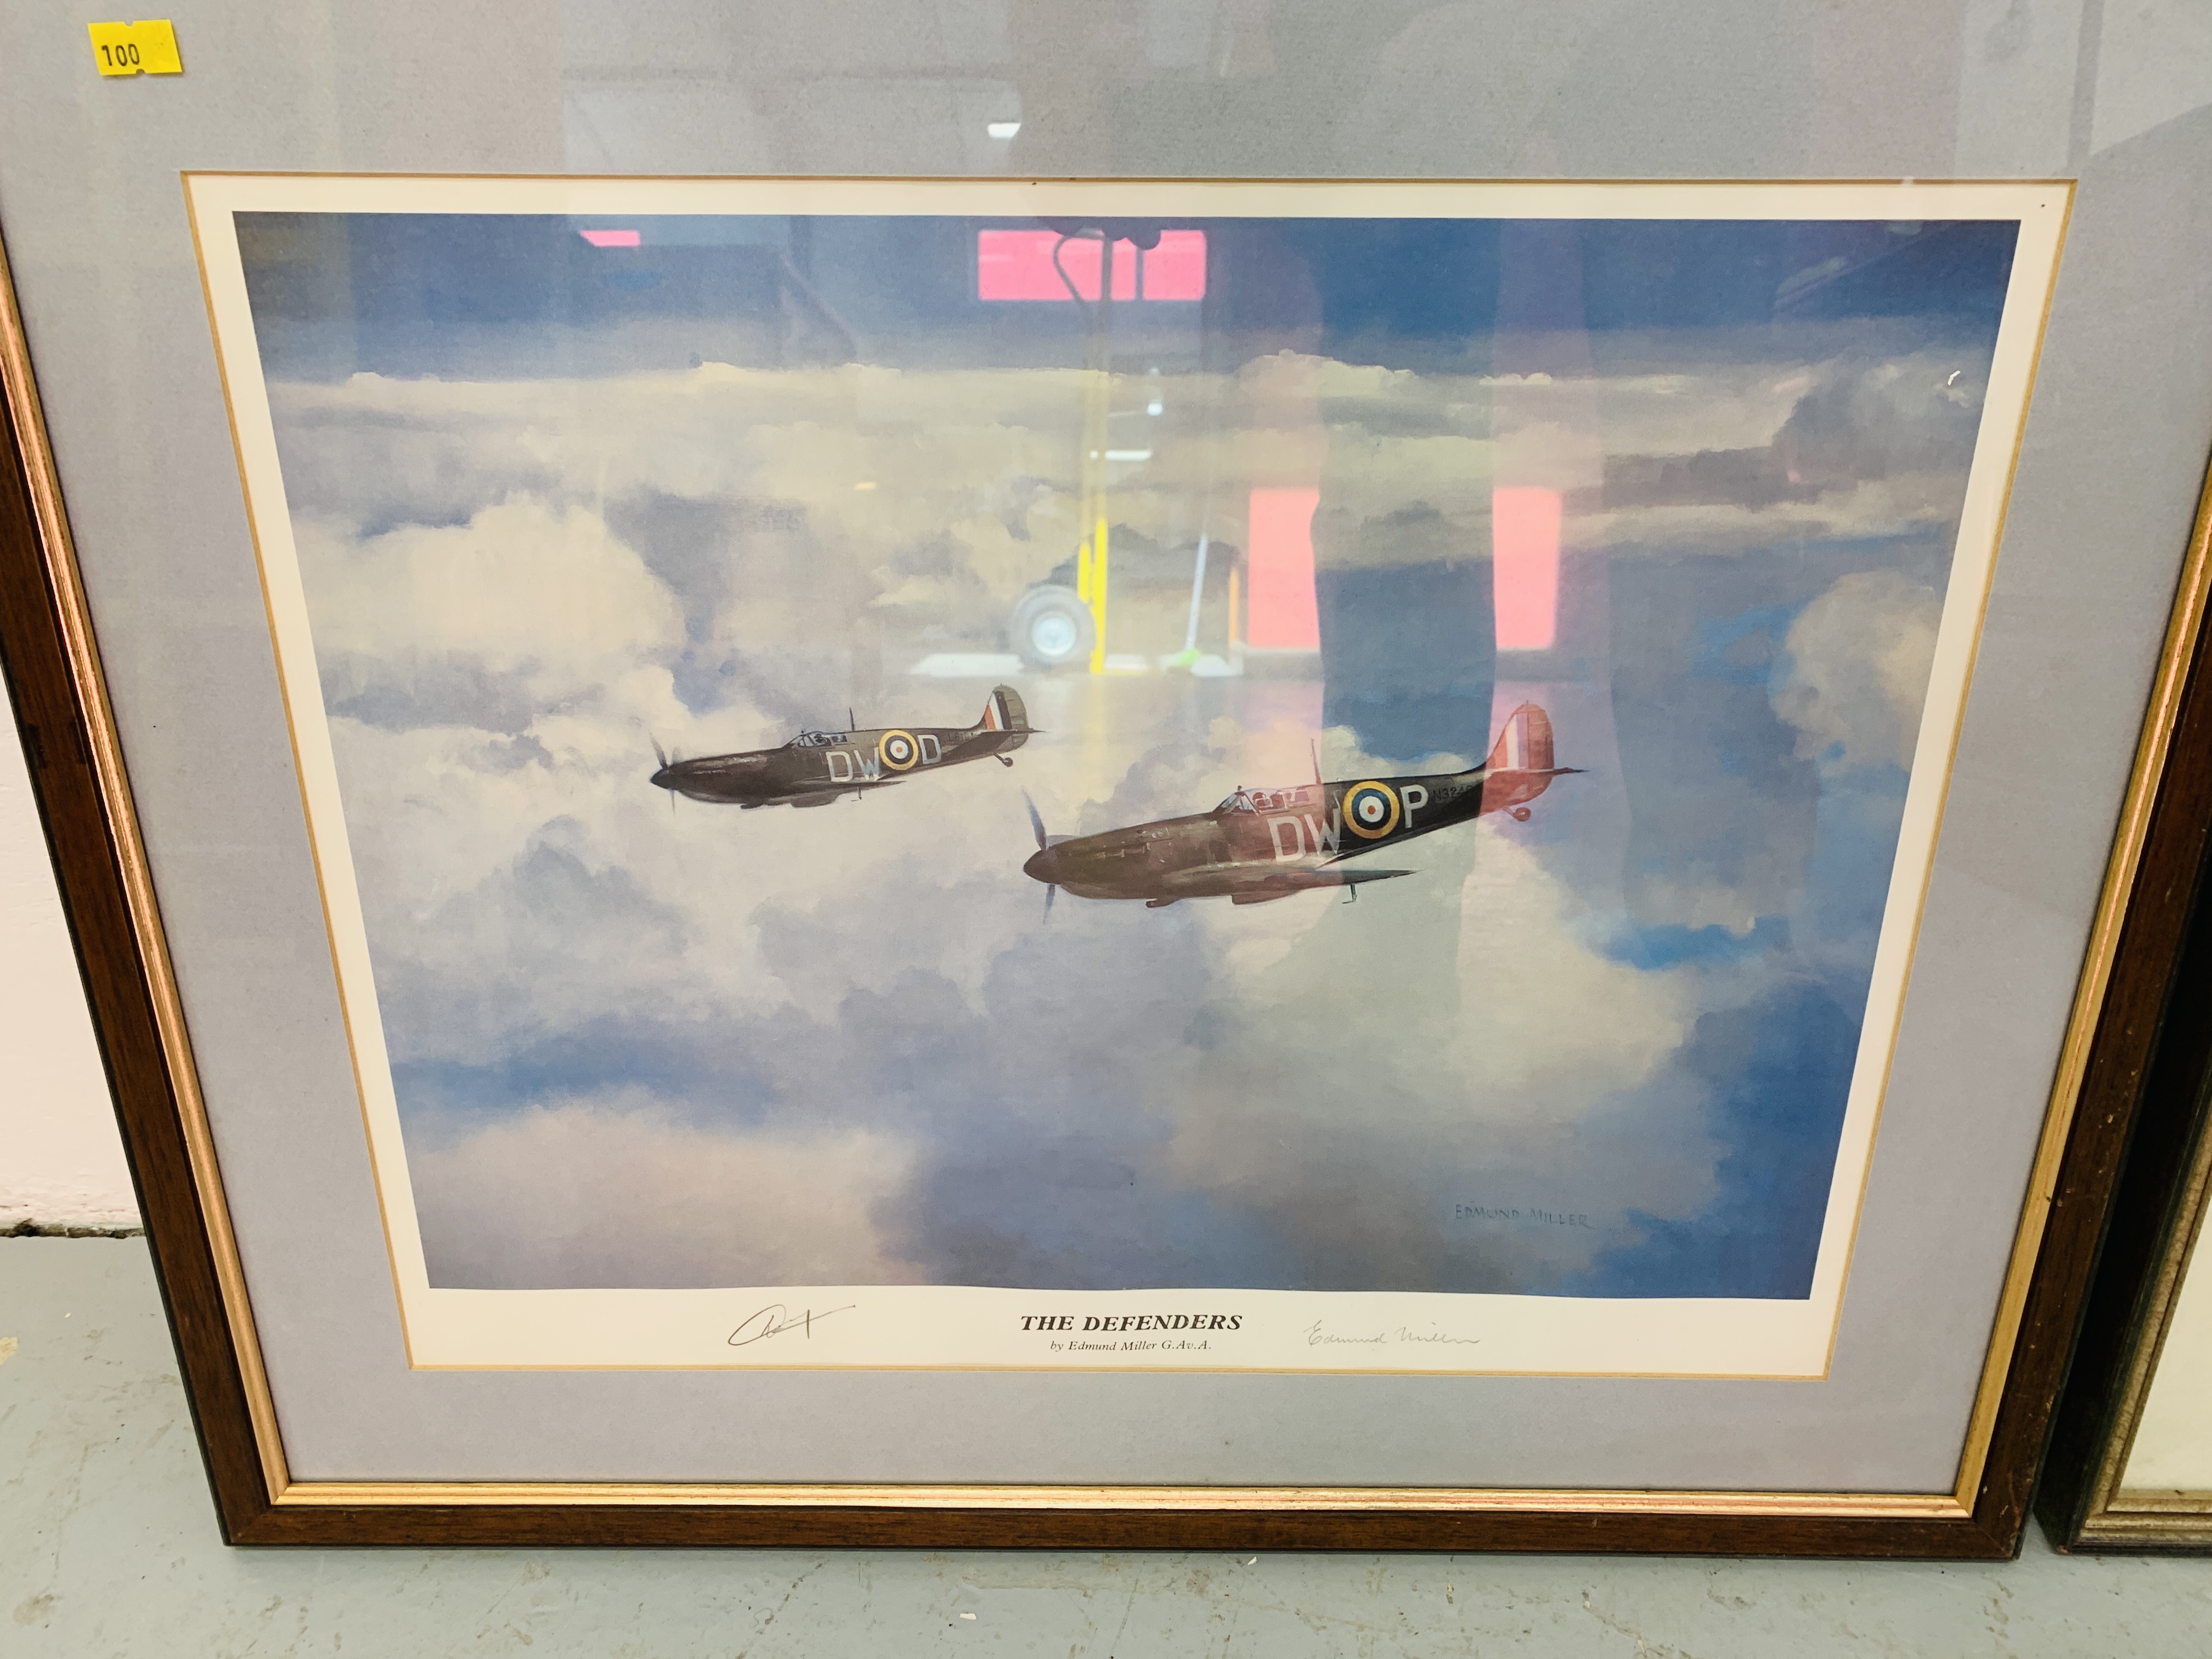 2 FRAMED AND MOUNTED FIGHTER PLANE PRINTS "HIGH SPIRITS" 1940, - Image 4 of 5